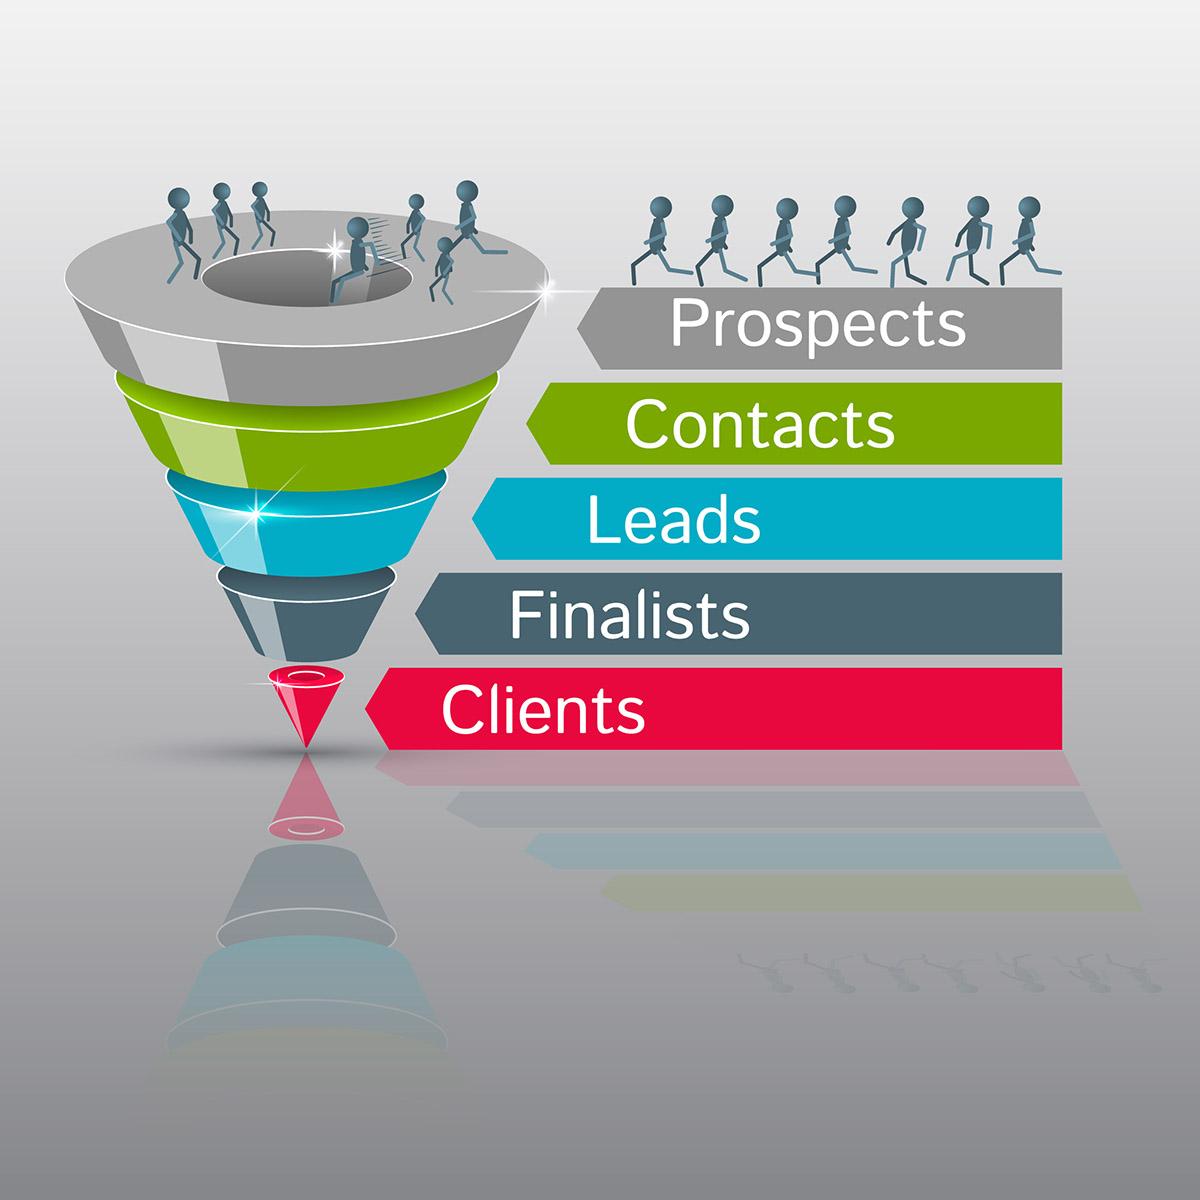 Content marketing and the conversion funnel: prospects, contacts, leads, final list, and clients